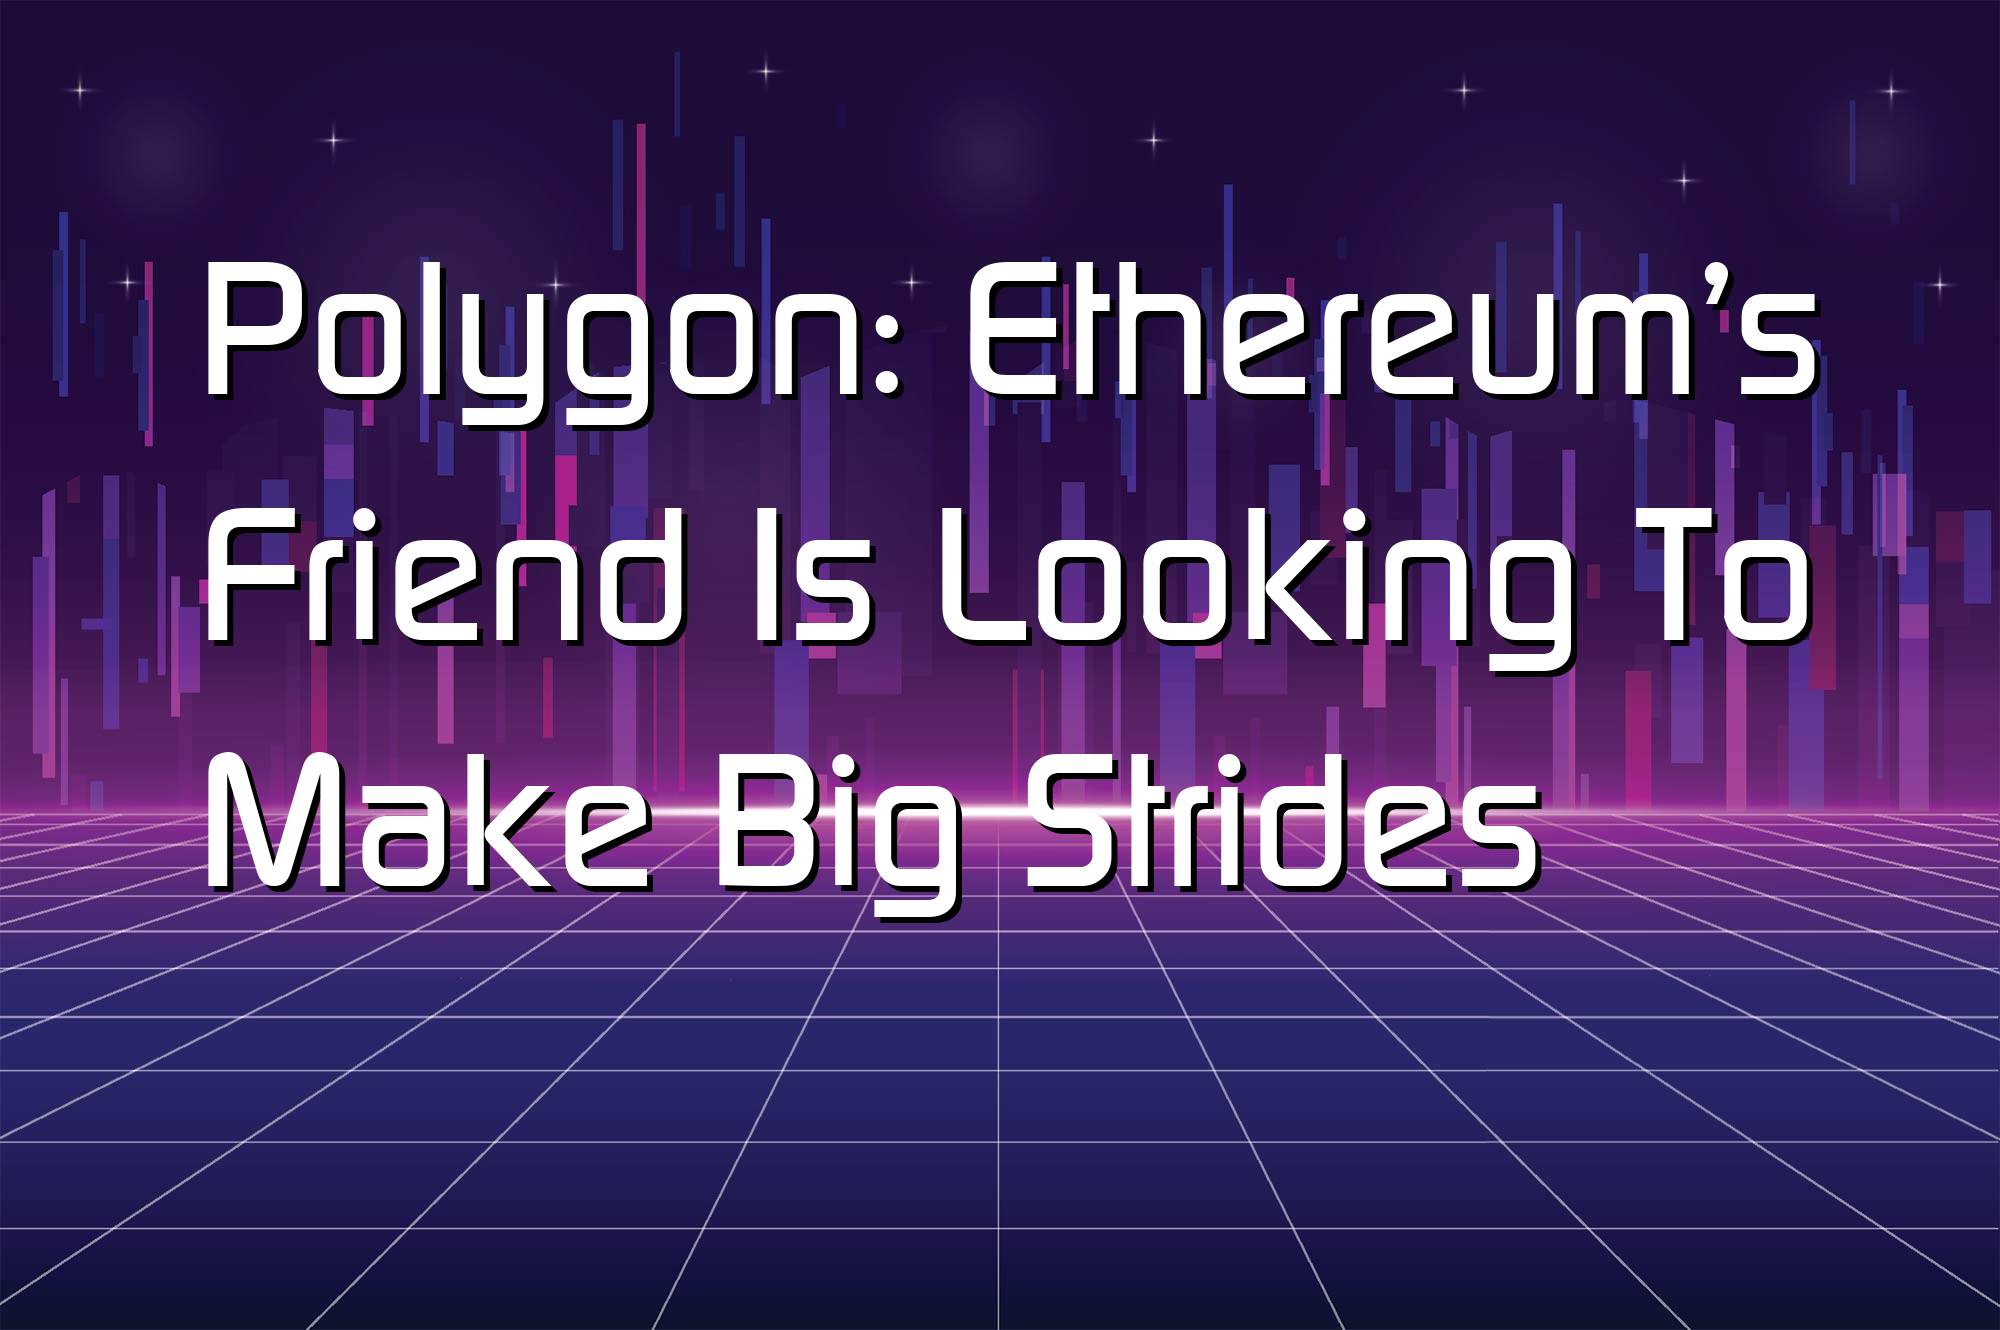 @$66664: Polygon: Ethereum’s Friend Is Looking To Make Big Strides